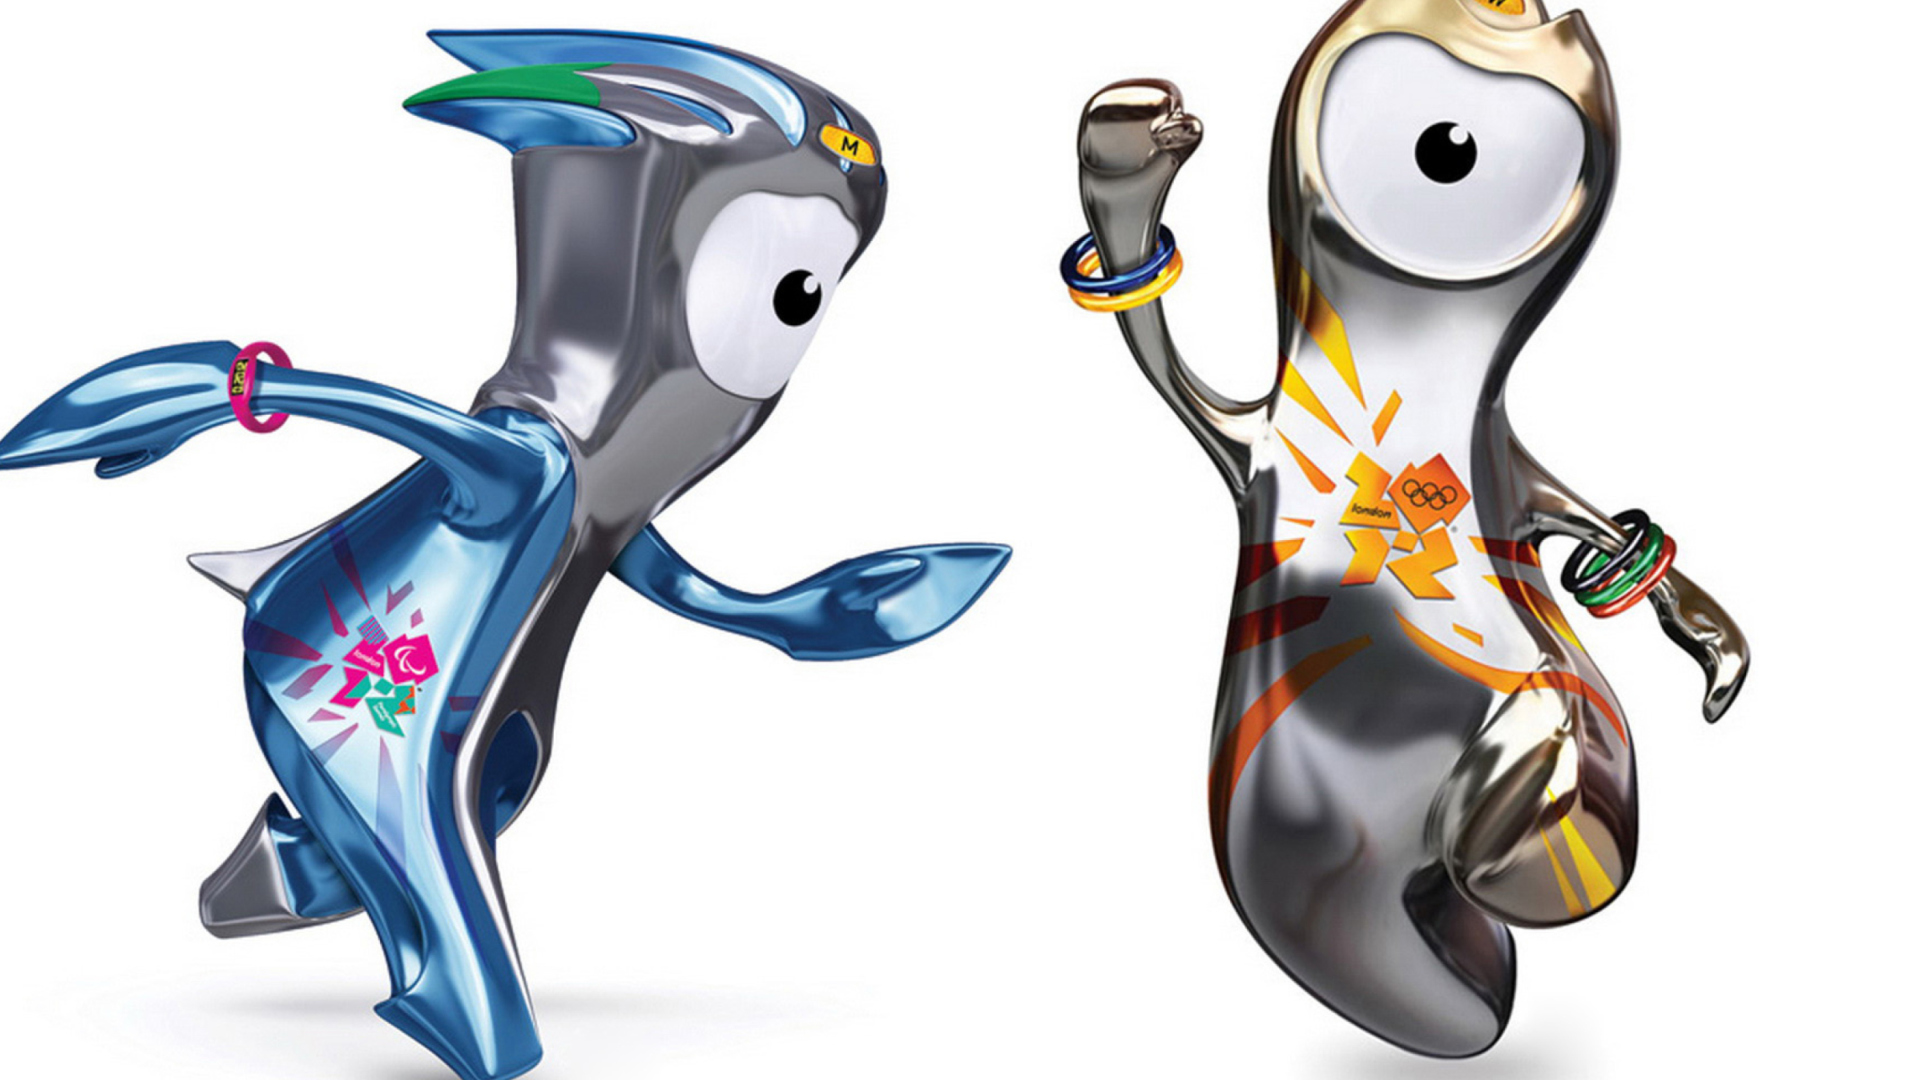 Wenlock and Mandevillelond 2012 Olympic Games wallpaper 1920x1080